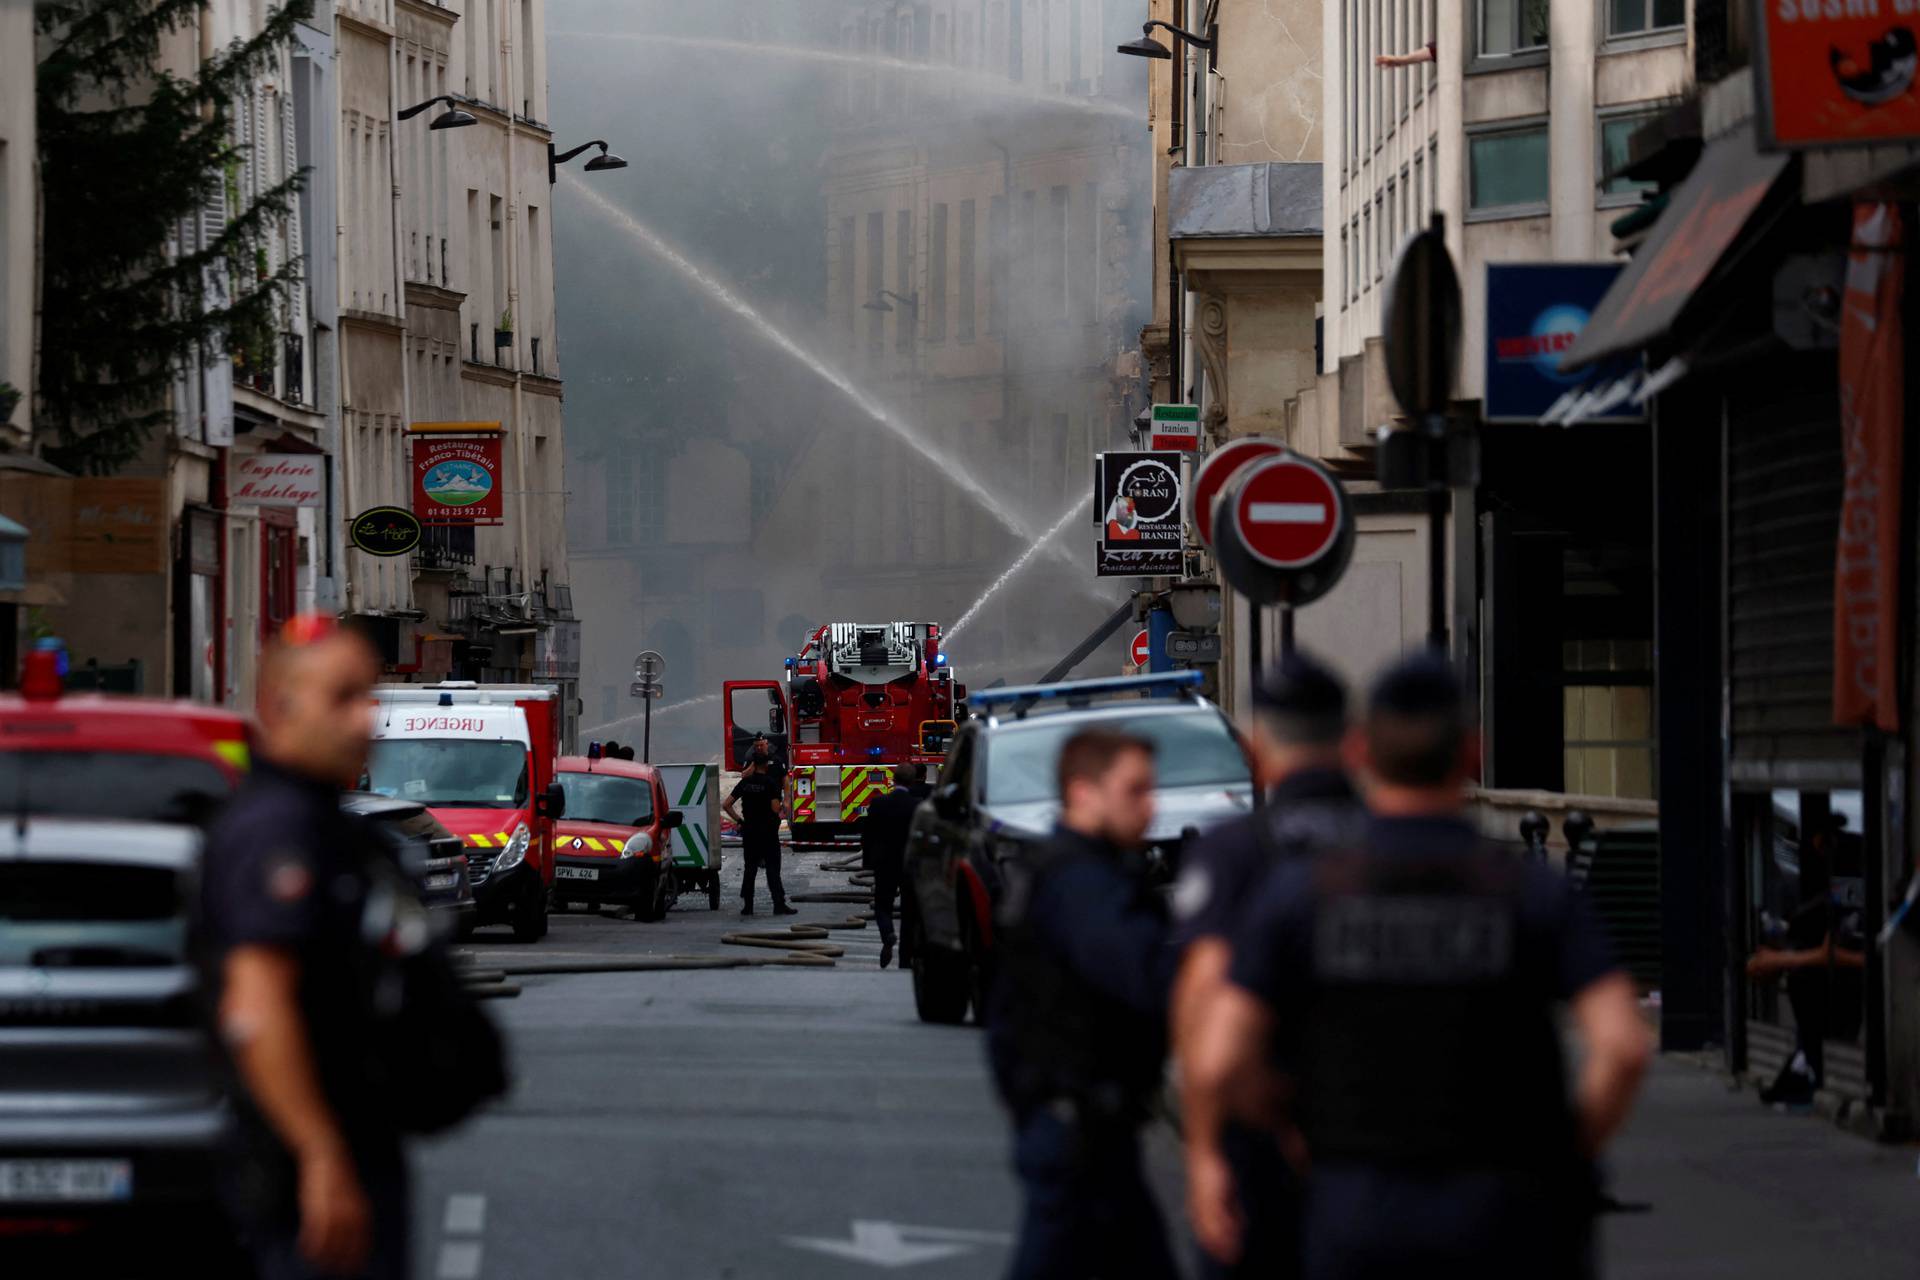 Gas explosion causes fire in central Paris